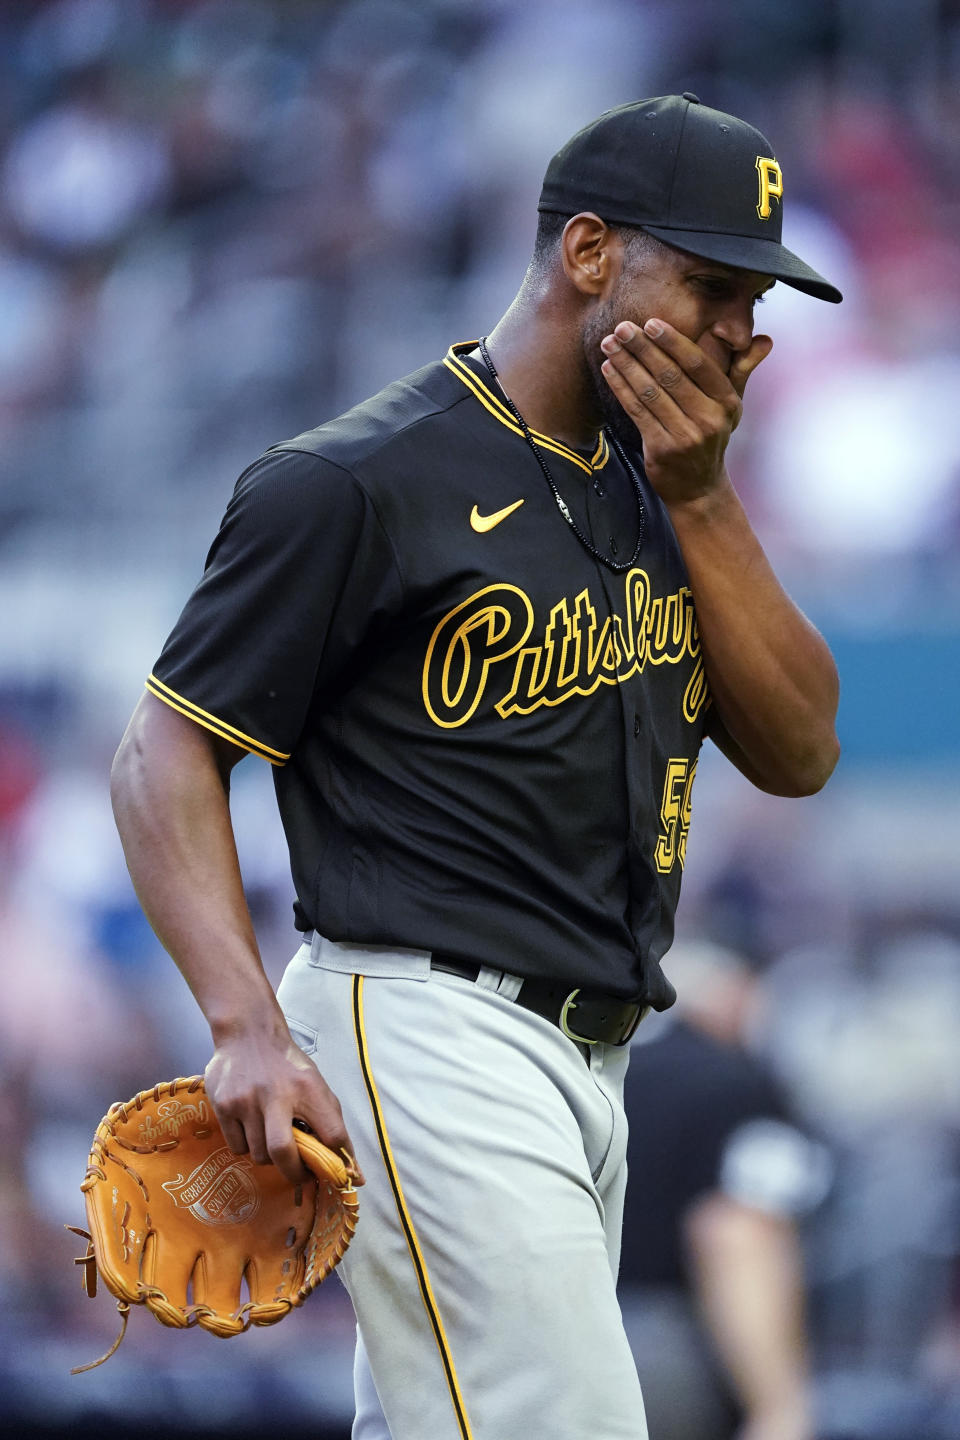 Pittsburgh Pirates starting pitcher Roansy Contreras walks to the dugout after recording the final out in the third inning of the team's baseball game Atlanta Braves on Friday, June 10, 2022, in Atlanta. (AP Photo/John Bazemore)